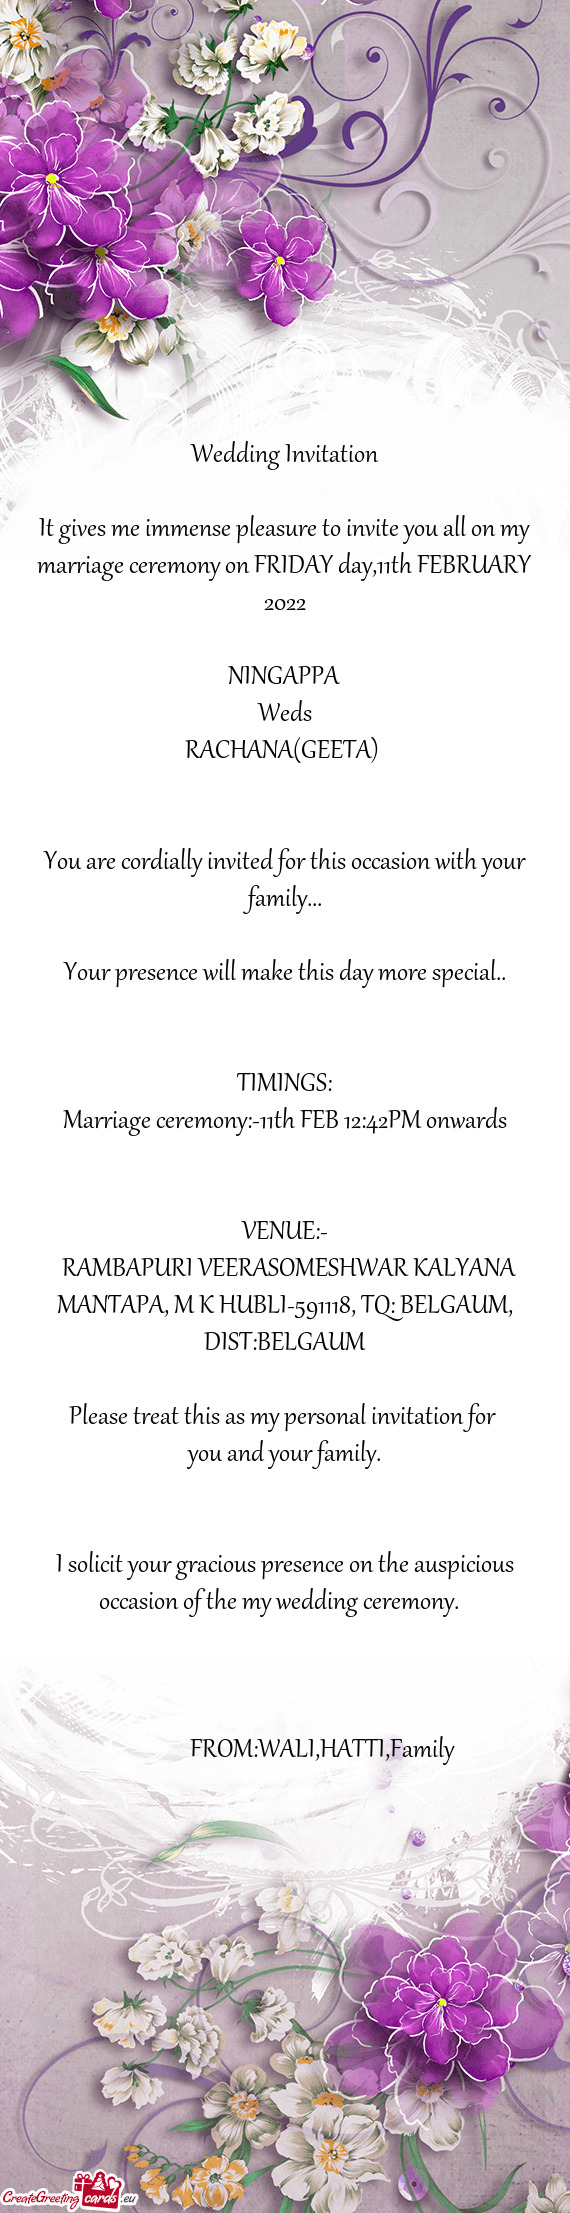 It gives me immense pleasure to invite you all on my marriage ceremony on FRIDAY day,11th FEBRUARY 2